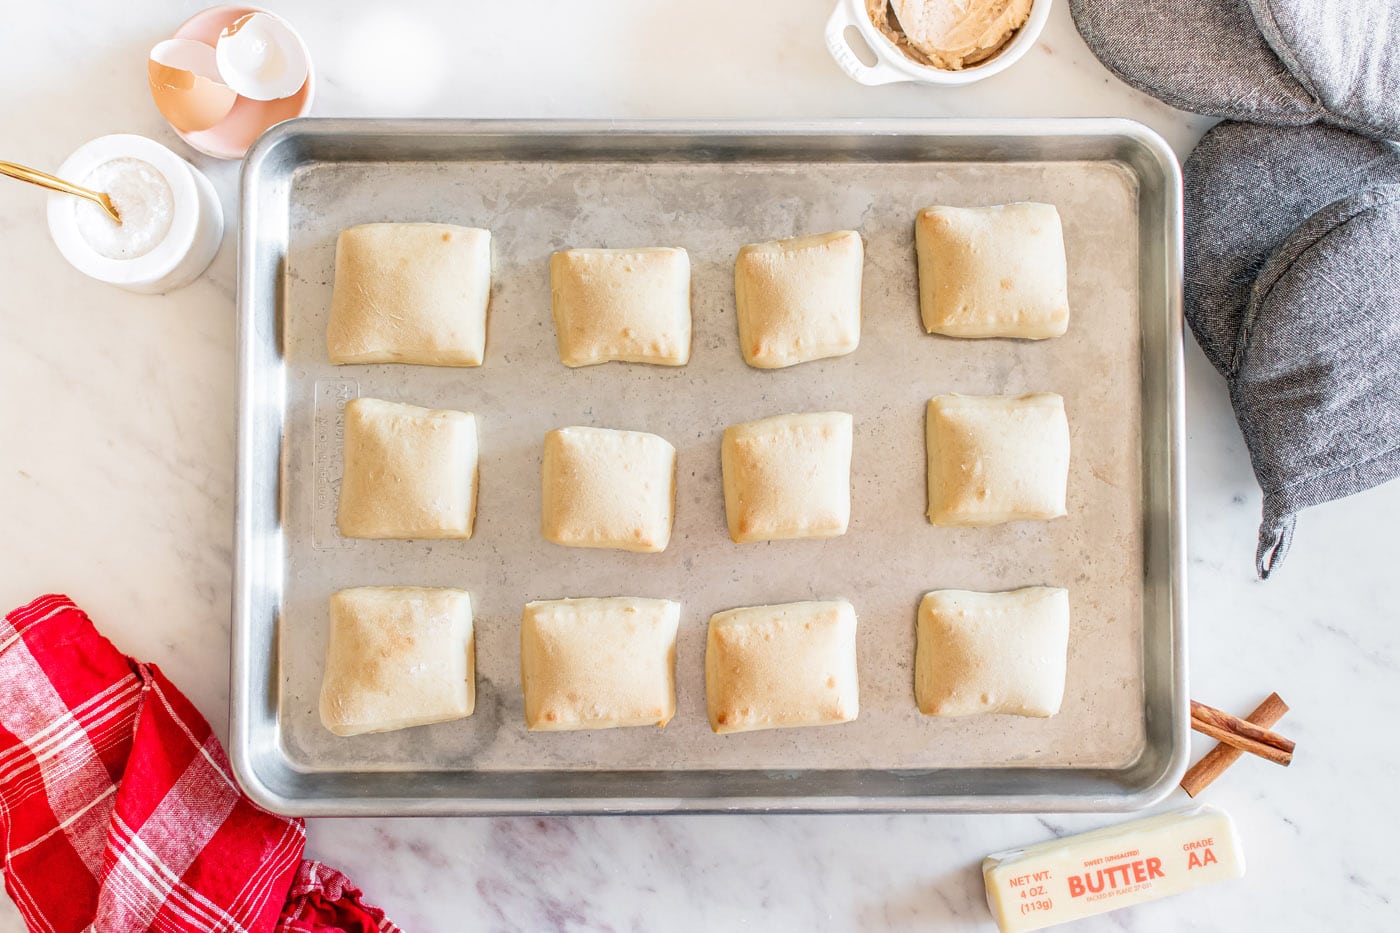 baked square shaped dinner rolls on a baking sheet